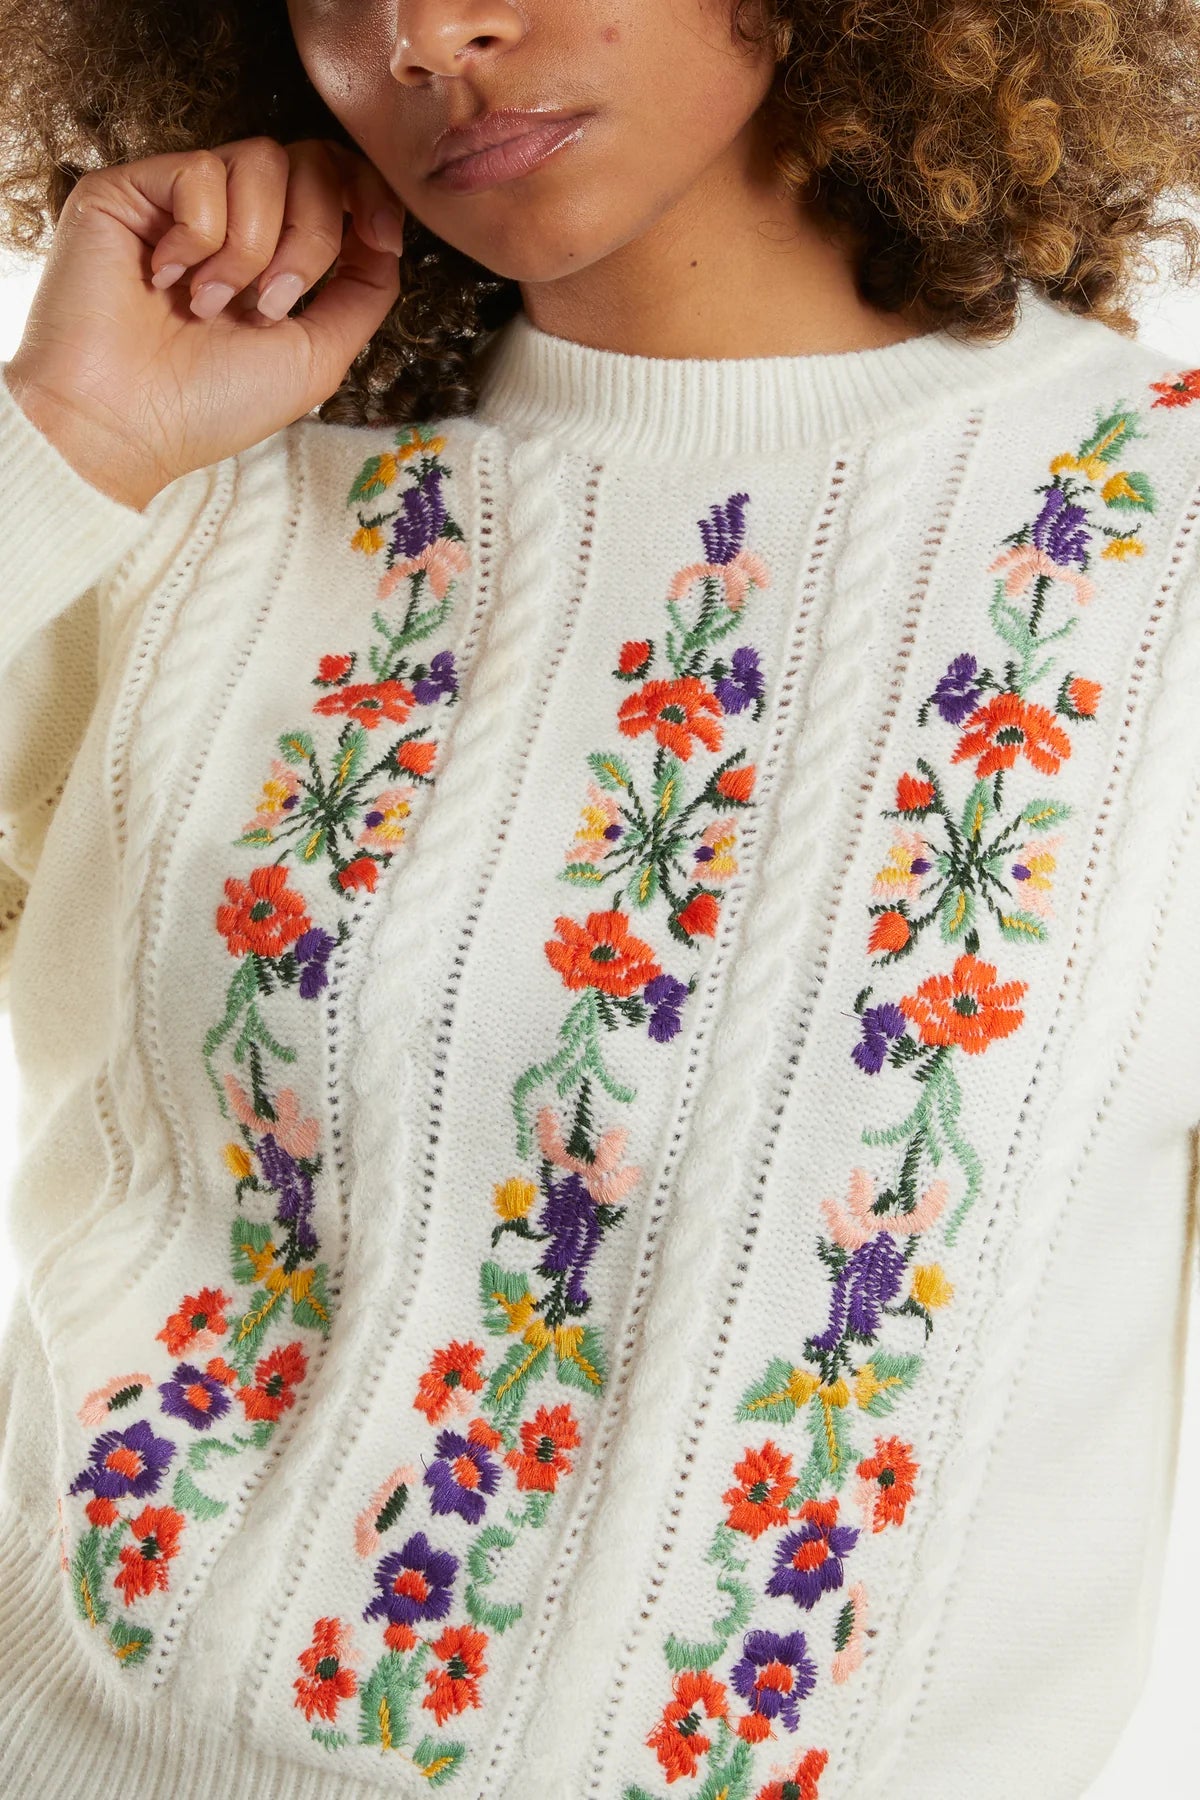 Embroidered Knit